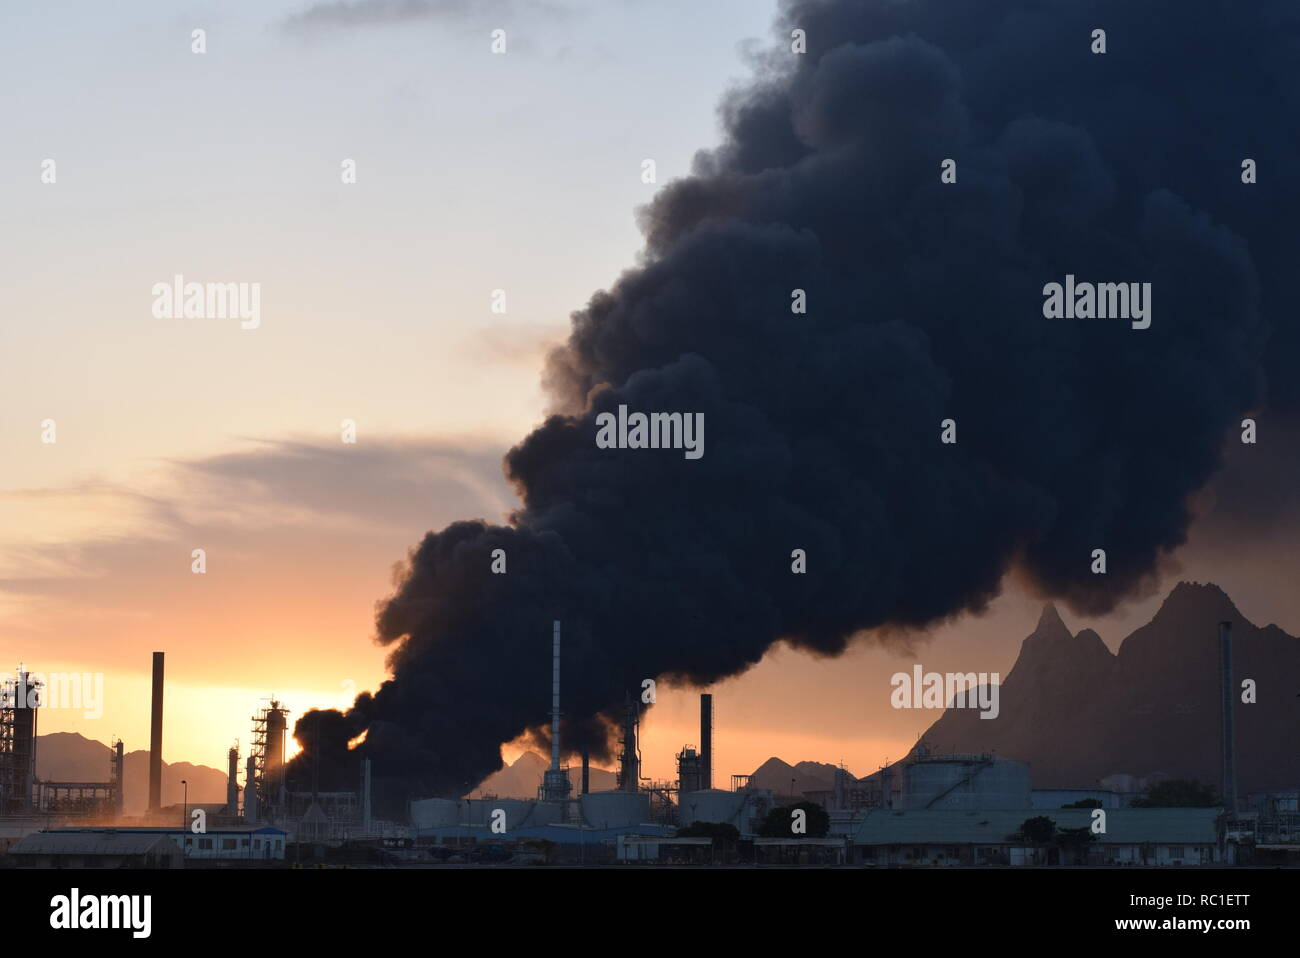 Beijing, China. 12th Jan, 2019. Photo taken on Jan. 12, 2019 shows heavy smoke from a state-owned oil refinery in Aden, Yemen. A new powerful explosion hit the the state-owned oil refinery in Aden on Saturday evening, injuring at least 15 people, a security official told Xinhua. Credit: Murad Abdo/Xinhua/Alamy Live News Stock Photo